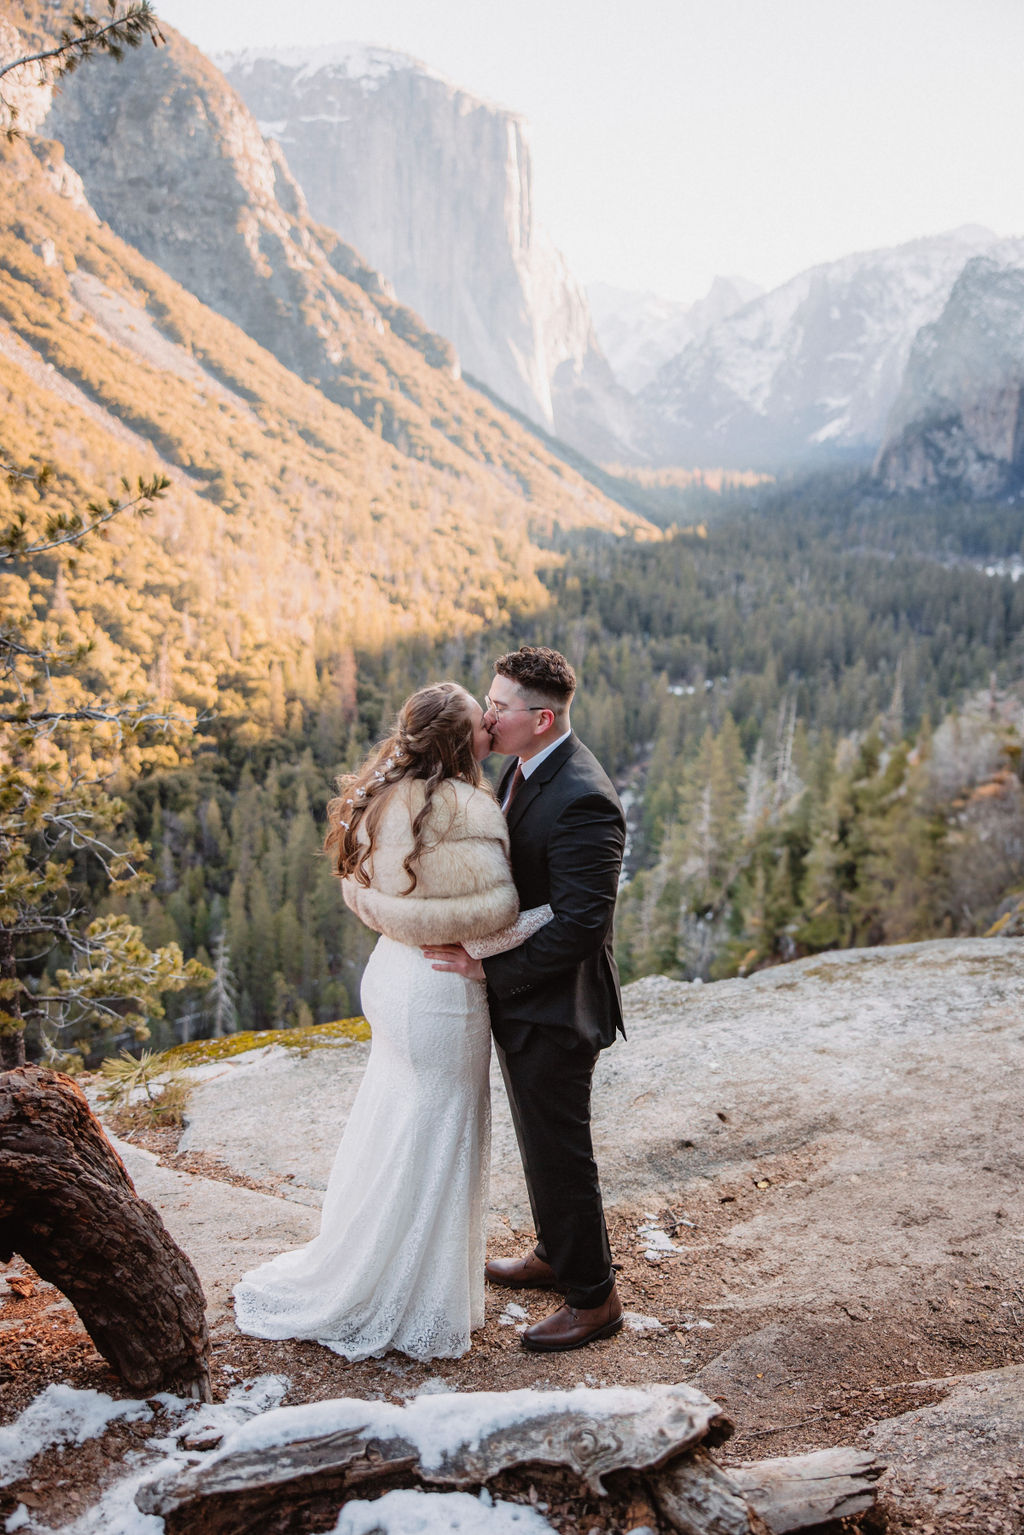 Couple sharing a kiss in a scenic mountainous landscape at Yosemite National Park